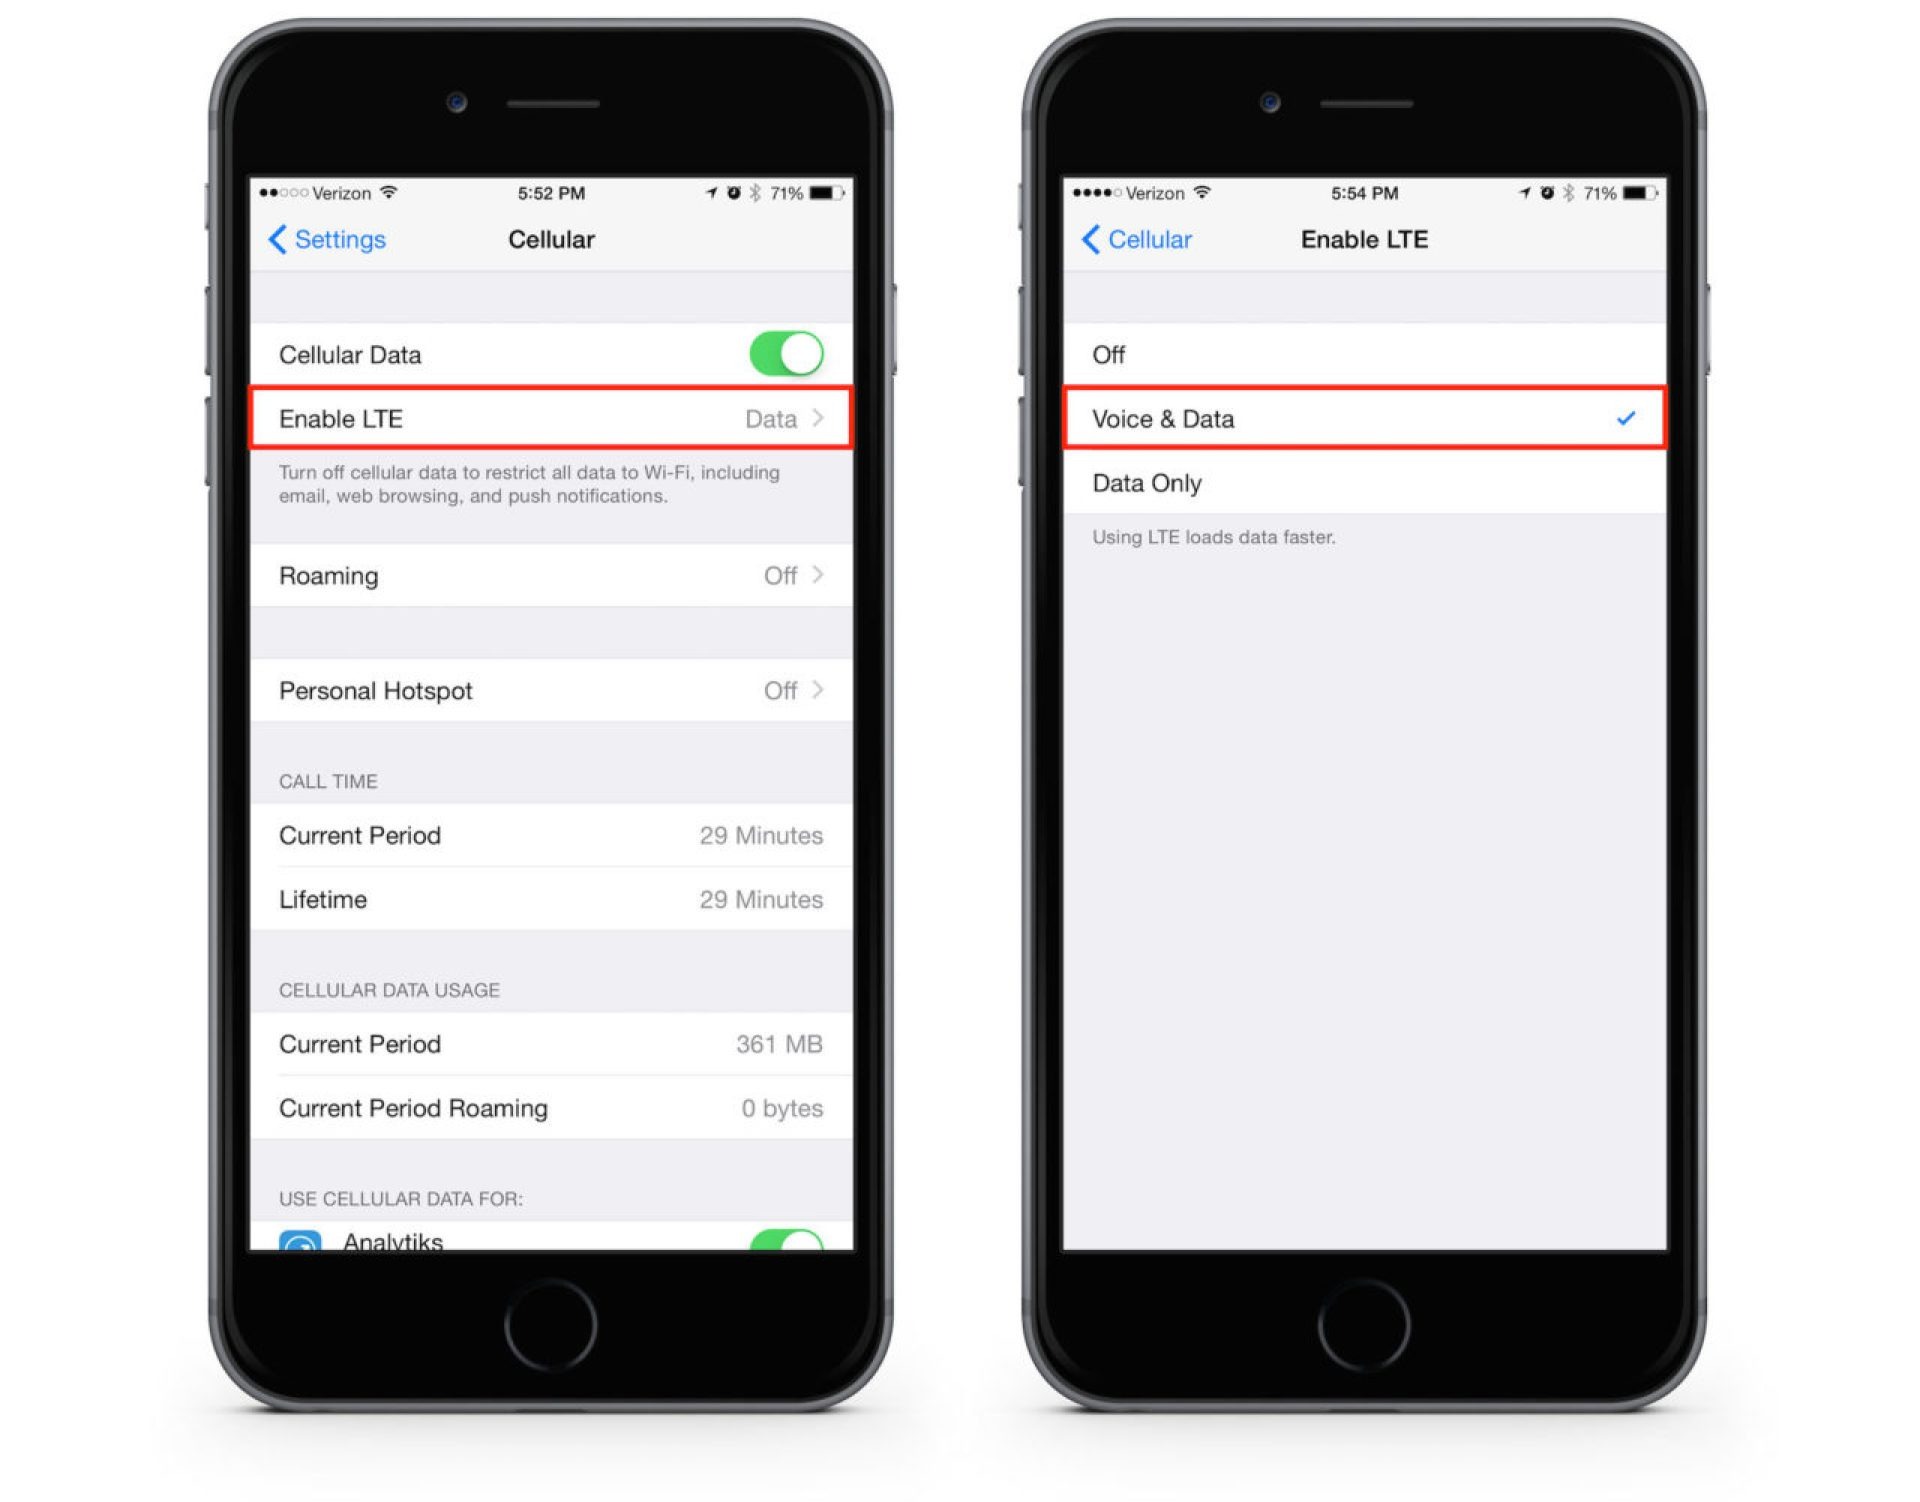 How To Use Data And Voice (HD Voice) On A Verizon iPhone